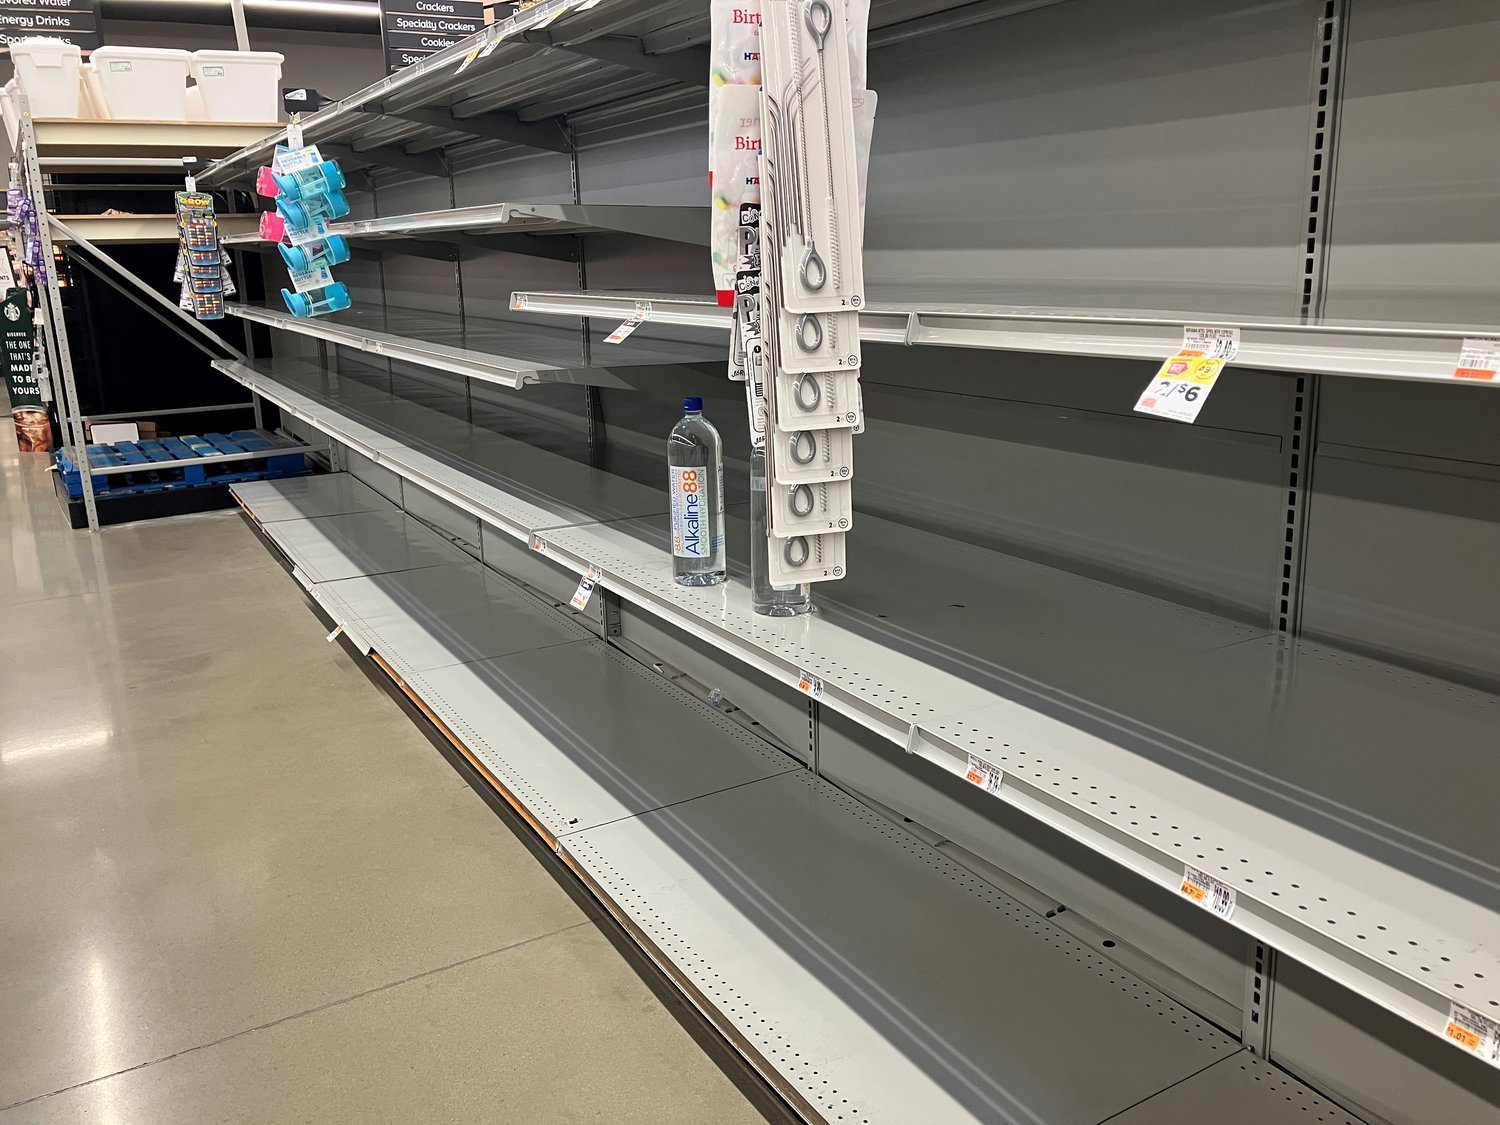 The shelves where cases of bottled water are typically kept were empty Monday afternoon at the Giant Food Stores location at Cross Keys Place on Swamp Road in Plumstead Township.